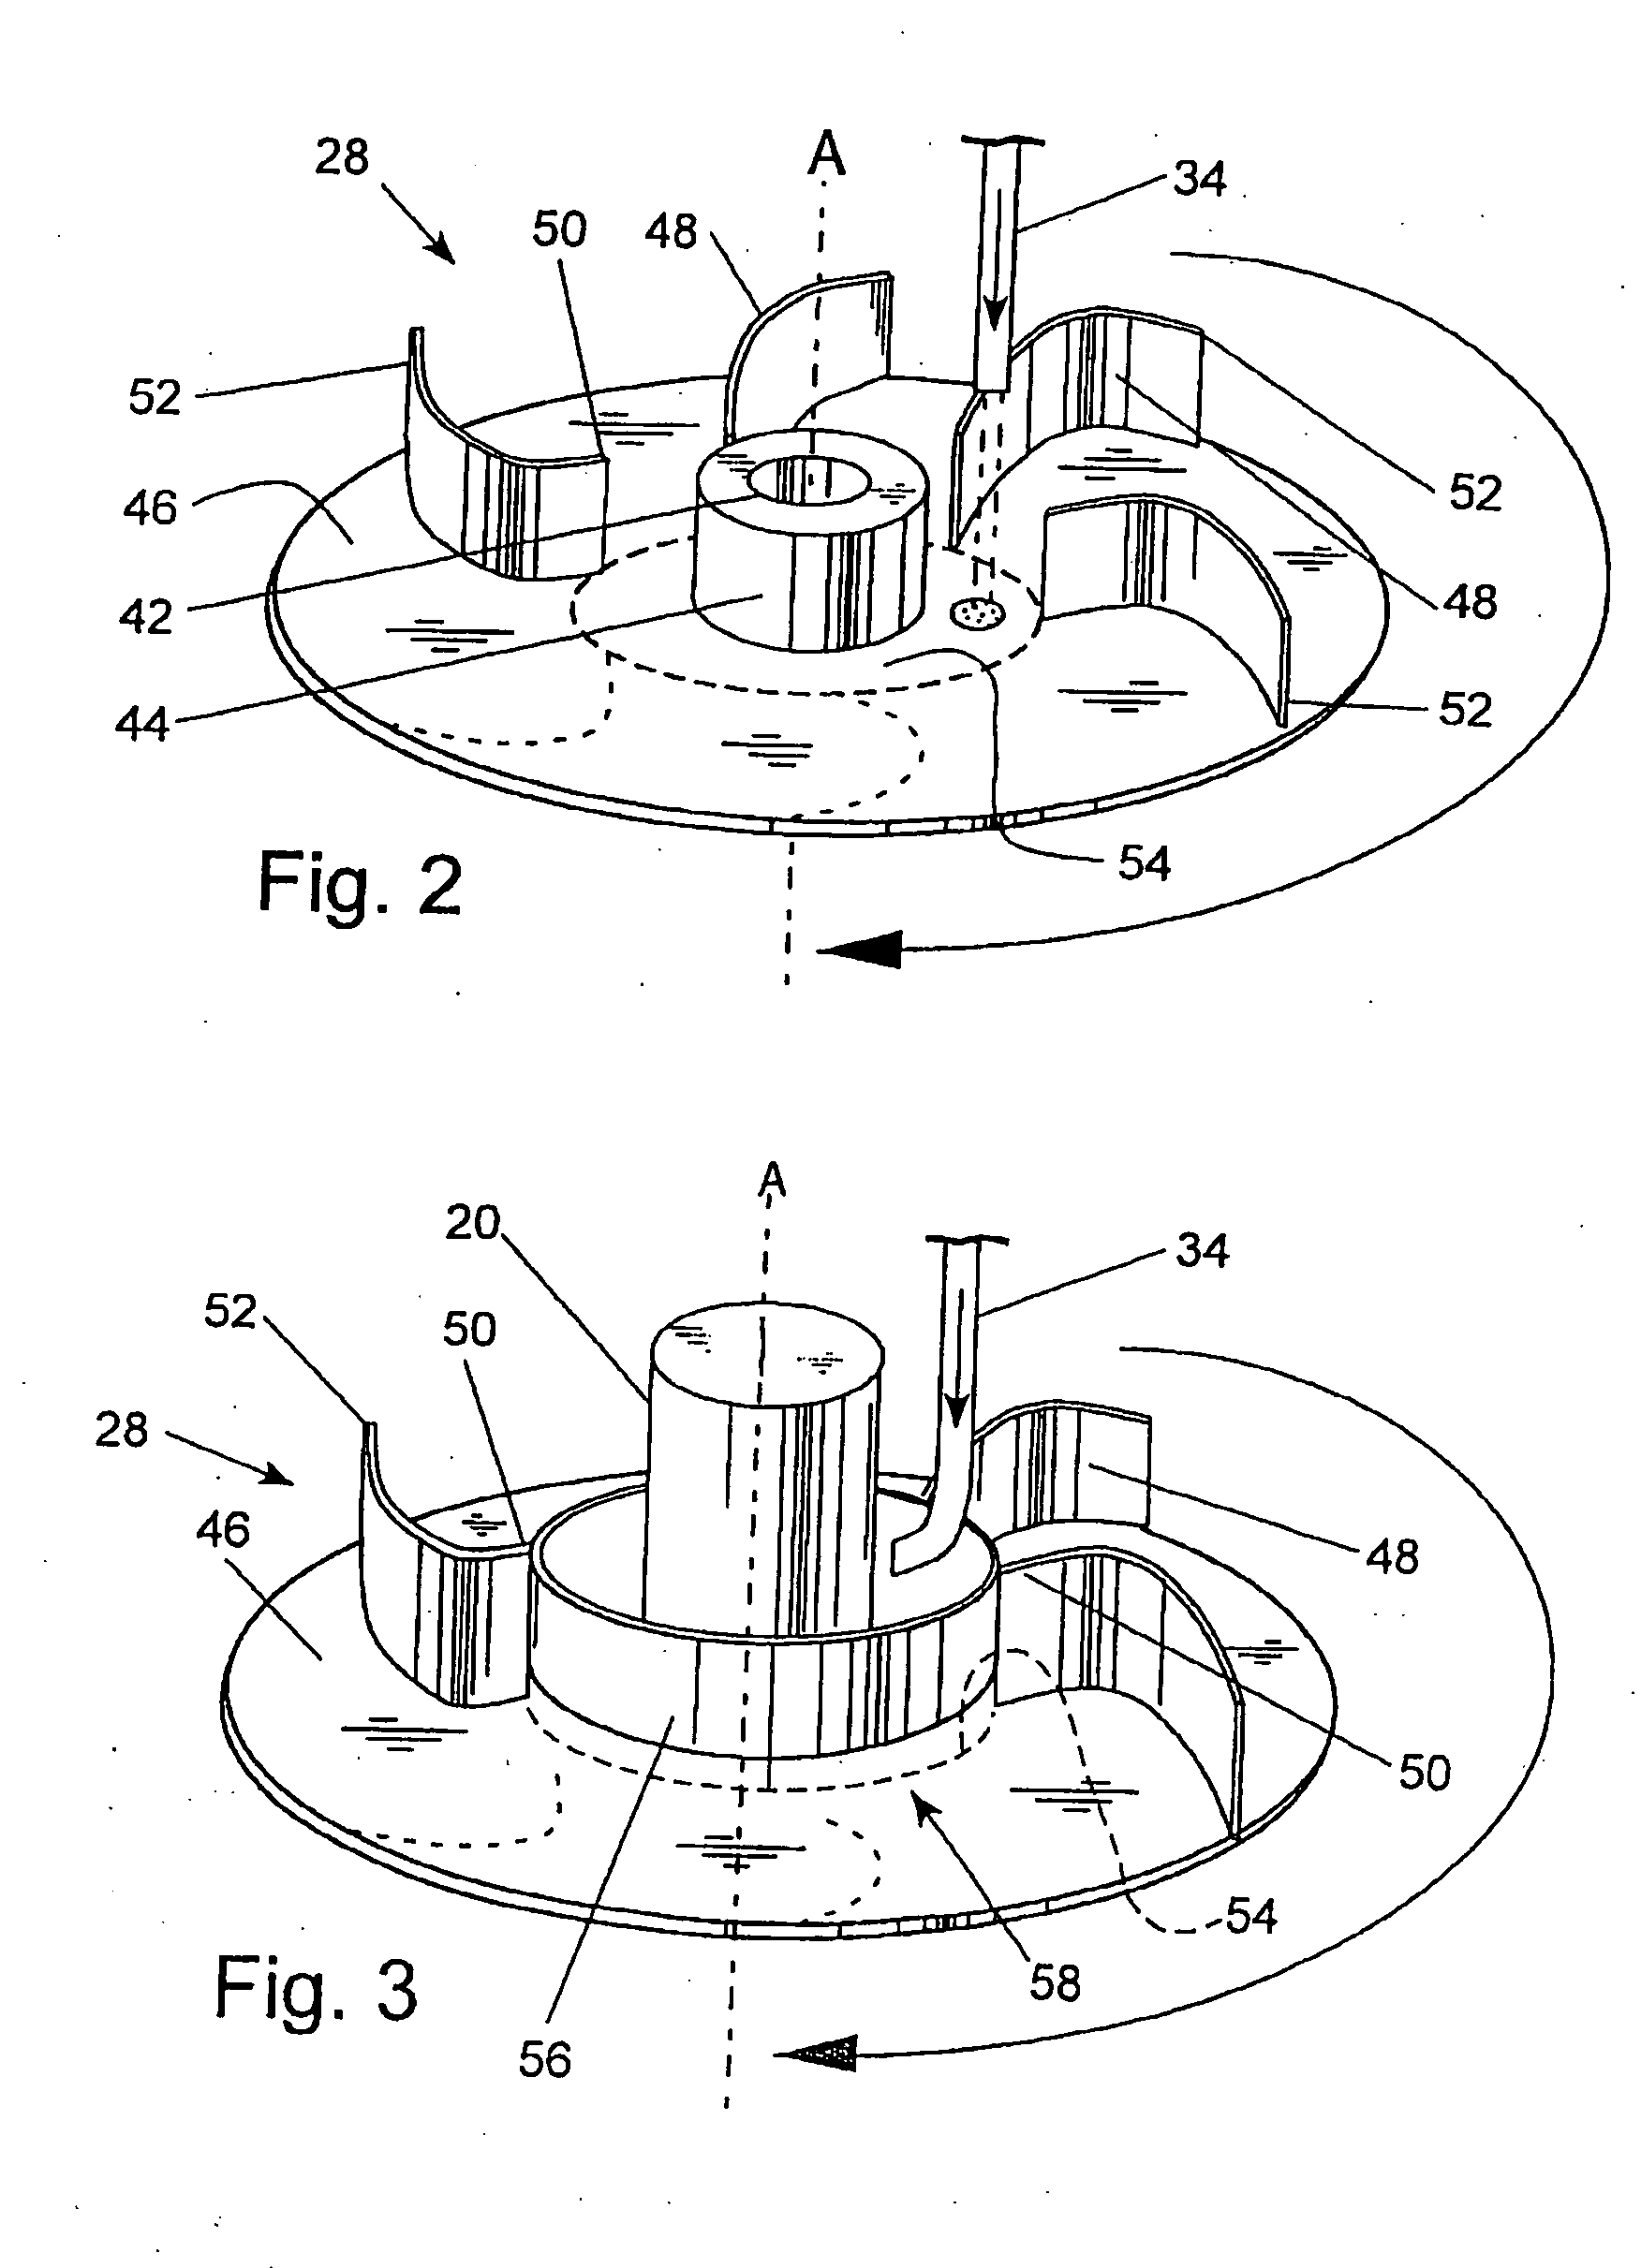 Liquid-gas phase reactor system